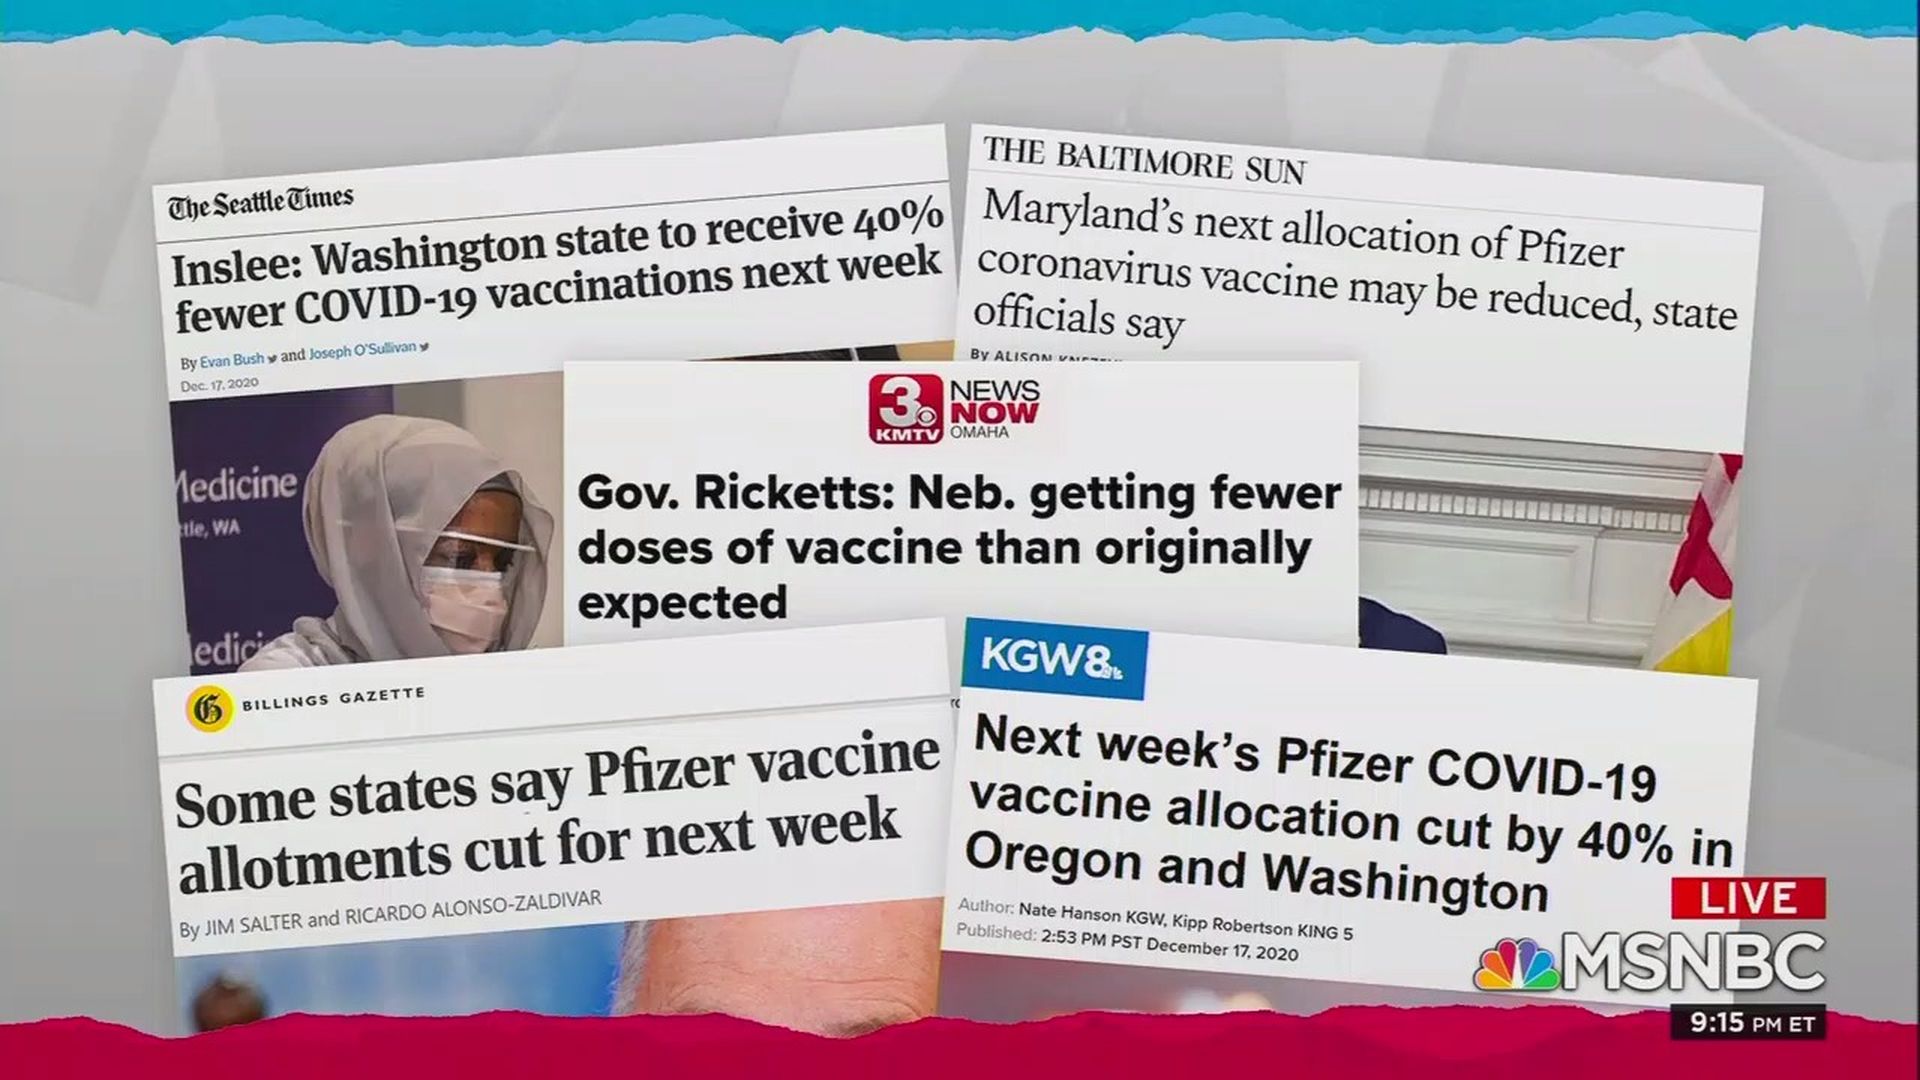 Headlines about vaccine shortages around the country